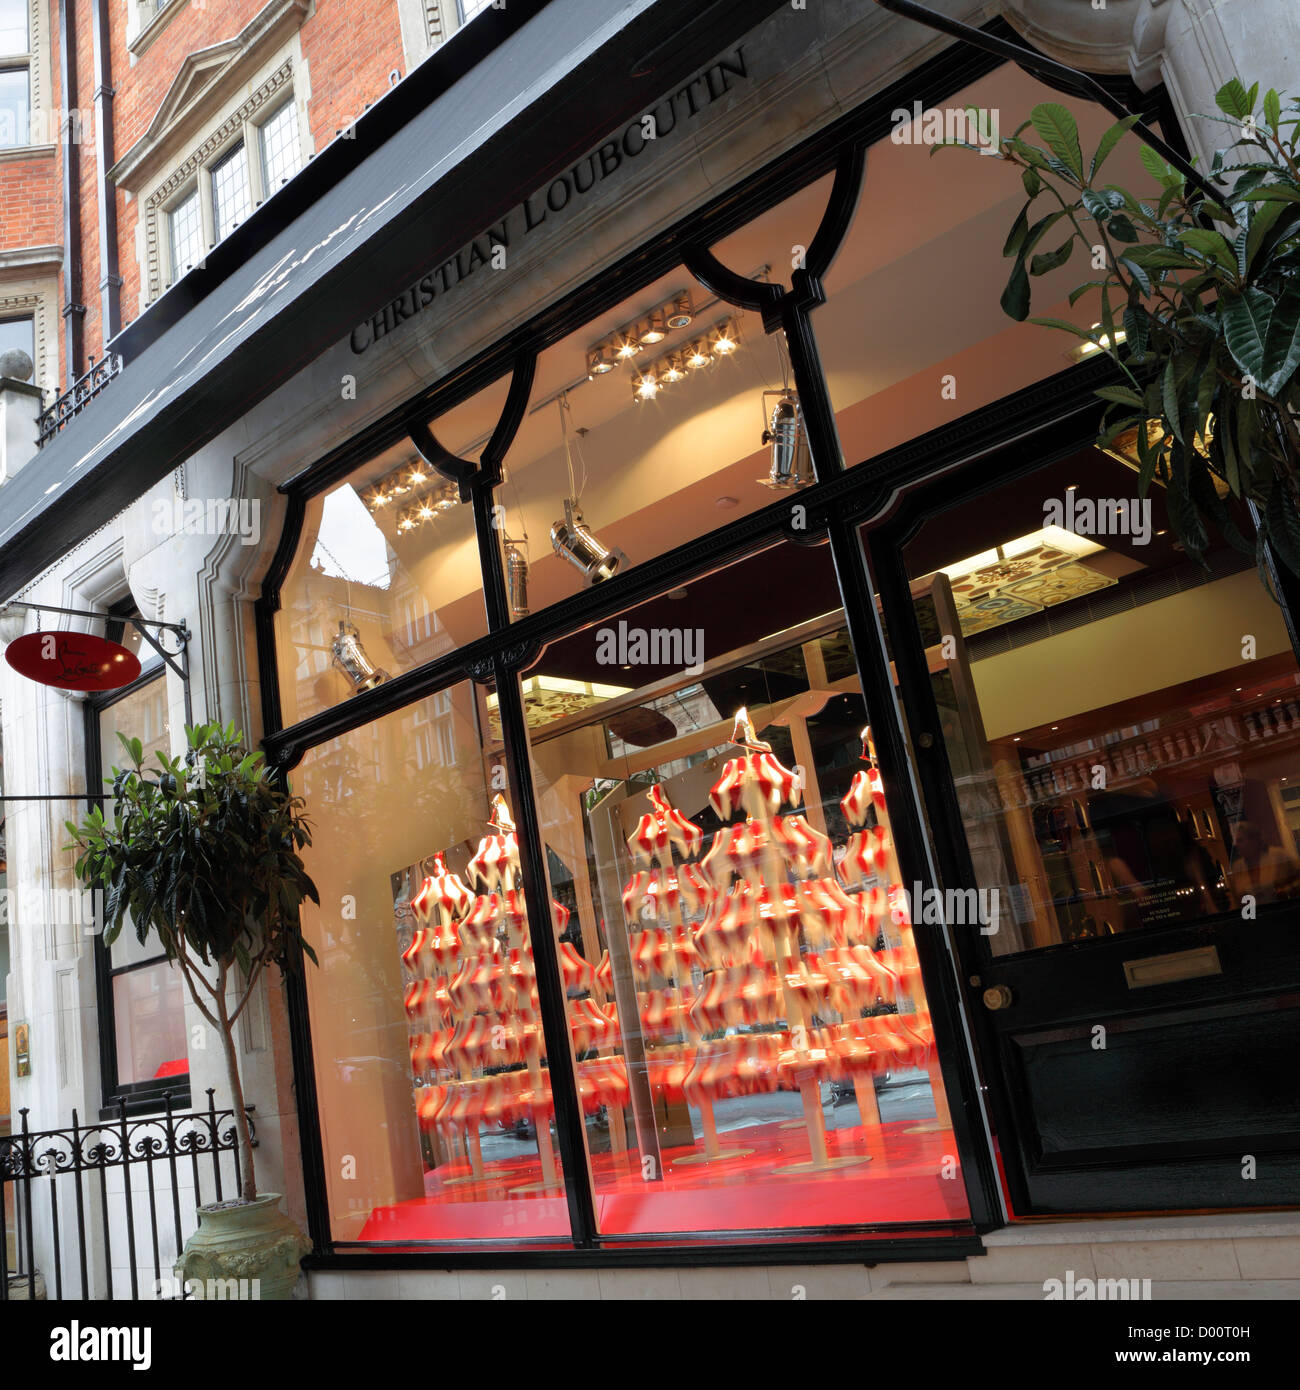 Louboutin,world famous for his shoes a retail outlet in Mount Street,Mayfair,London Stock Photo -